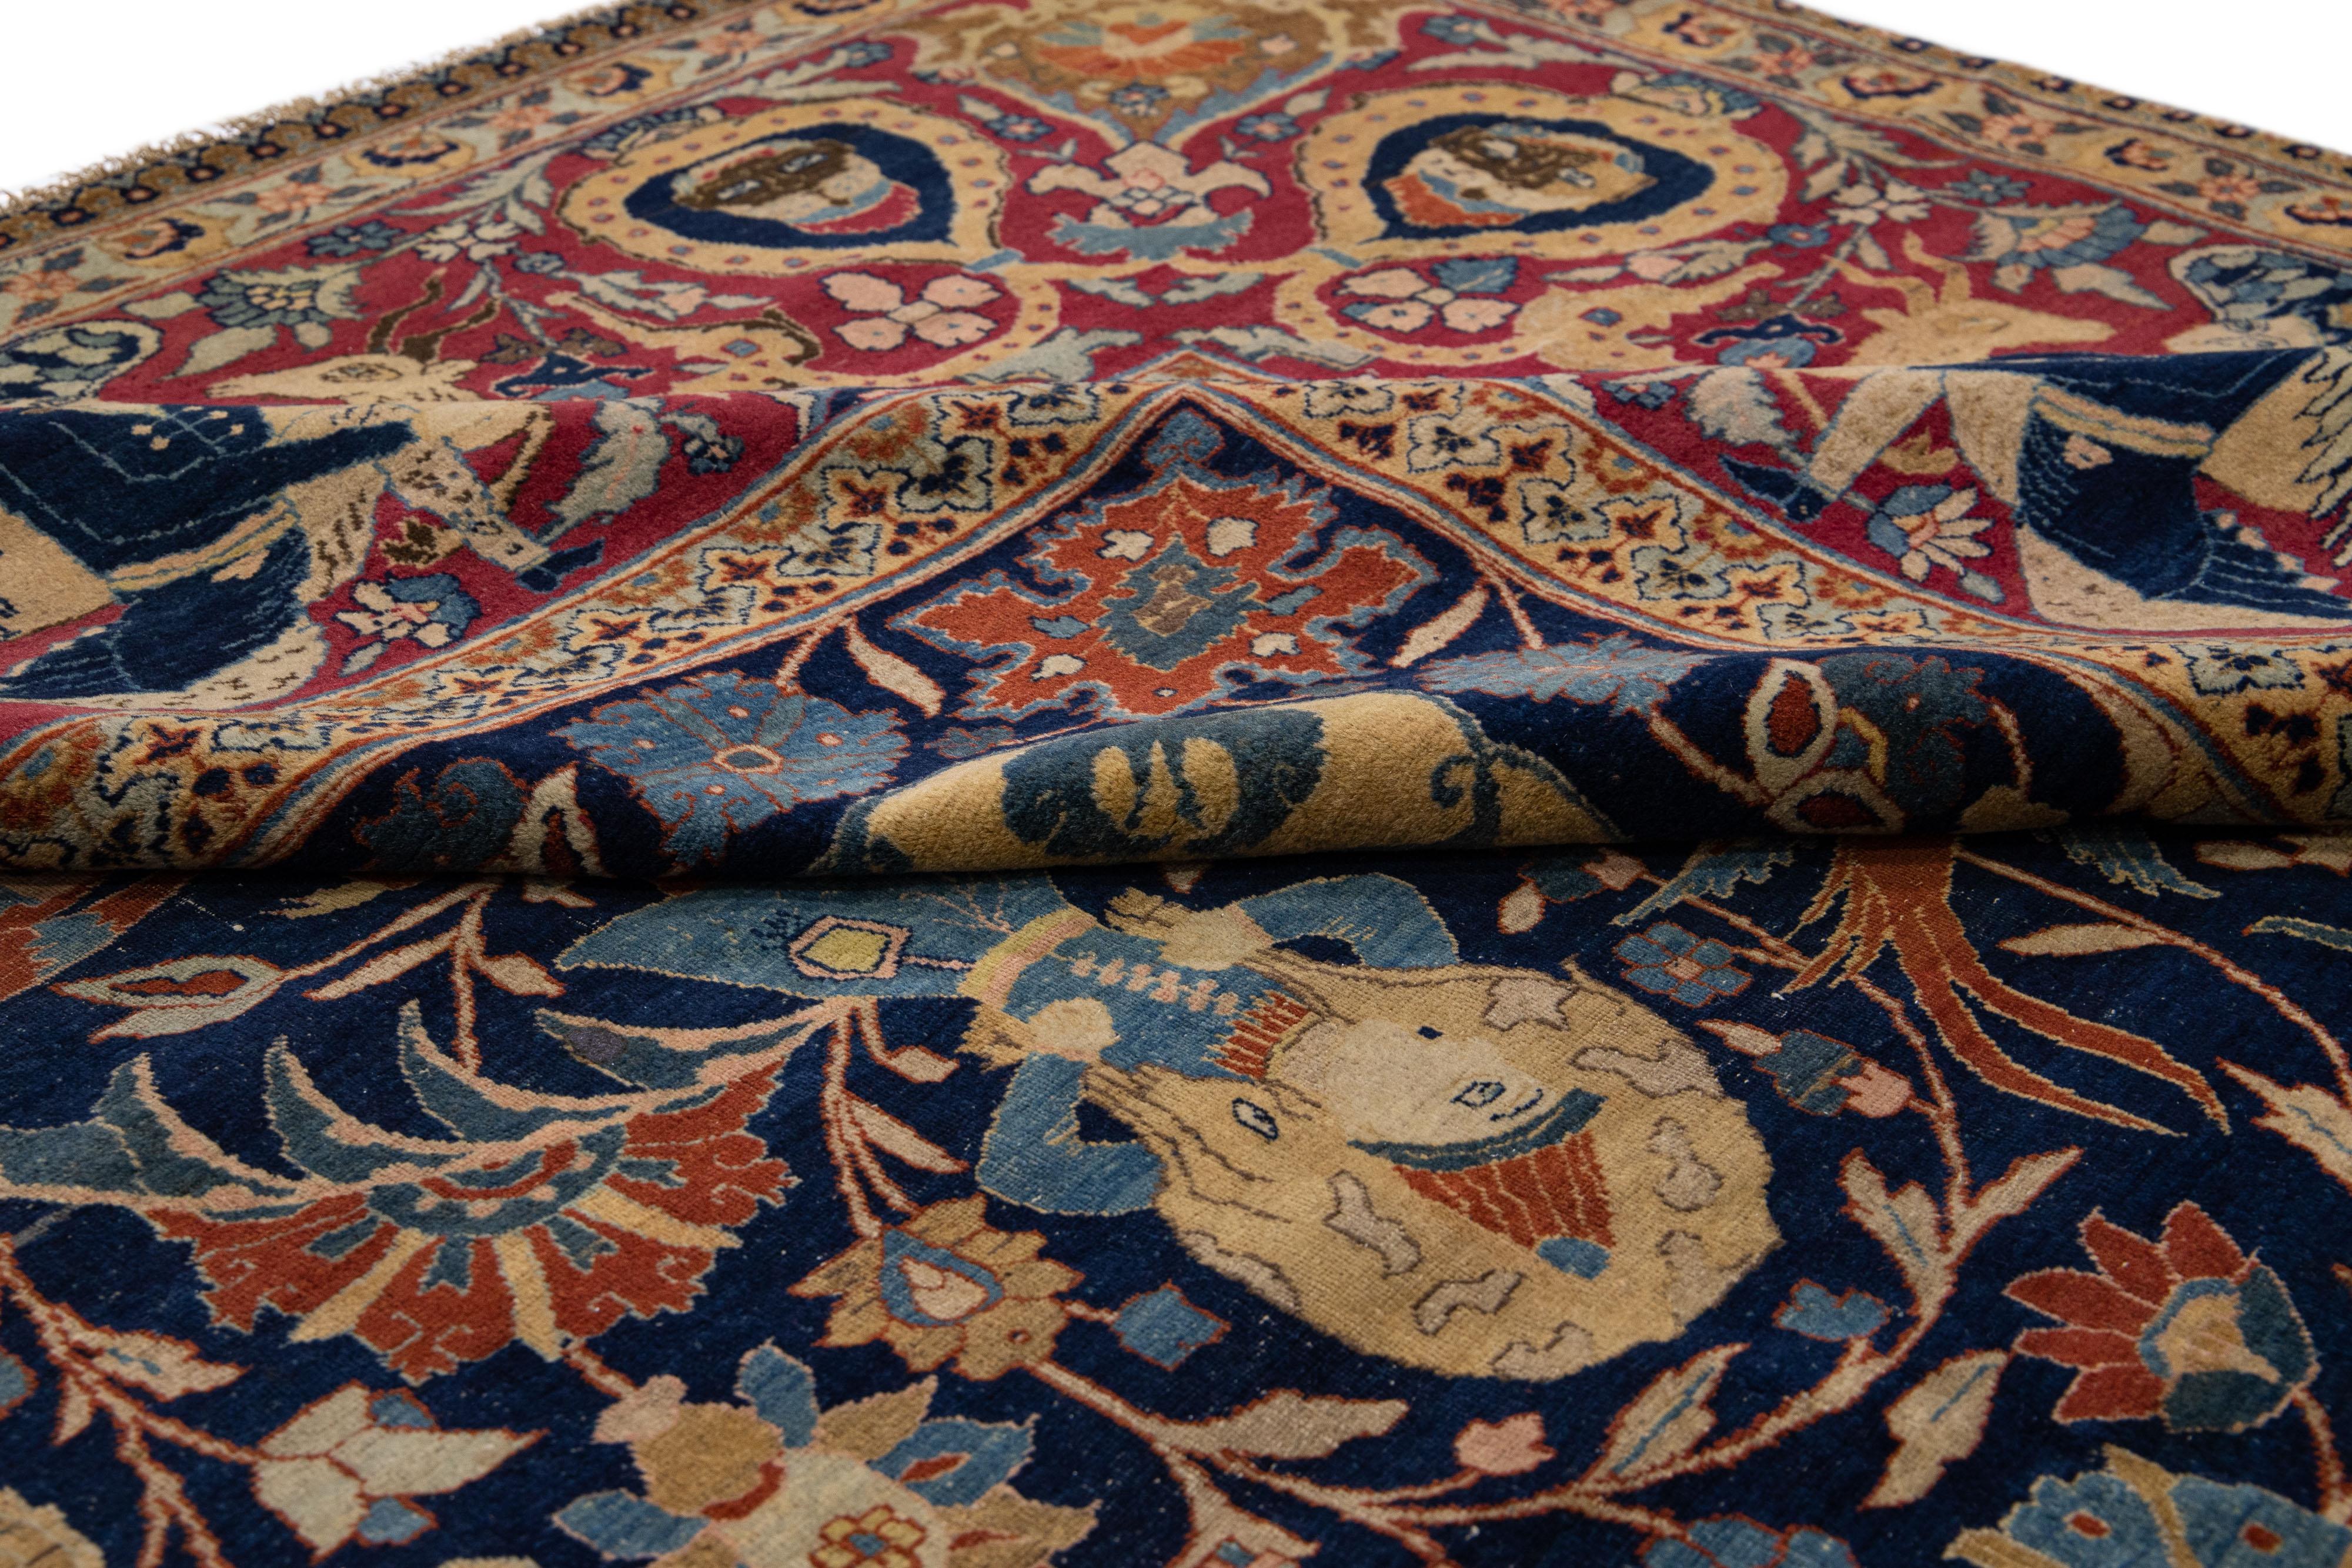 Beautiful Antique hand-knotted wool rug with a blue color field. This rug has a red frame with multicolor accents in an all-over geometric floral design.

This rug measures 12'4